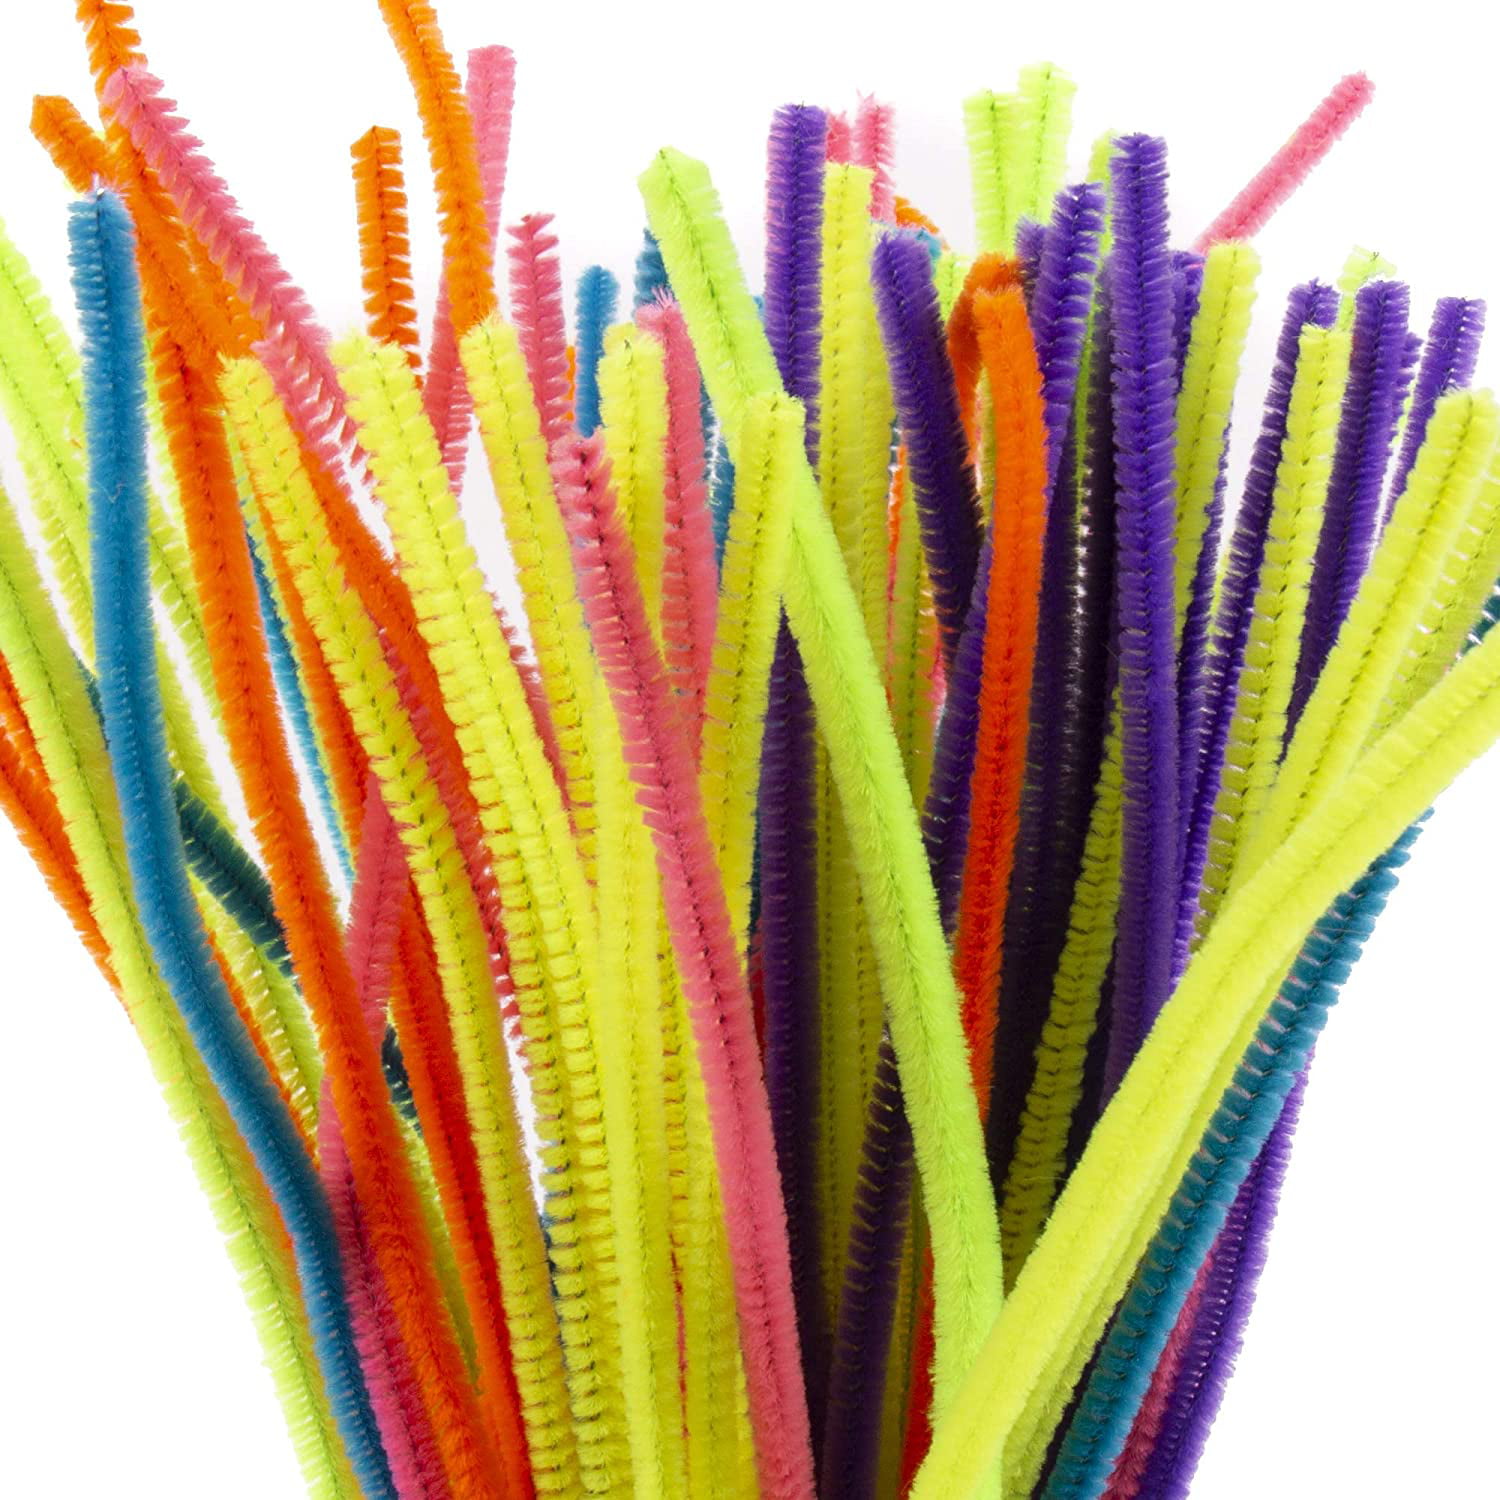 Baker Ross Ax923 Bumpy Pipe Cleaners - Pack of 100, Craft Embellishments, Ideal for Winter Arts and Crafts Projects for Kids